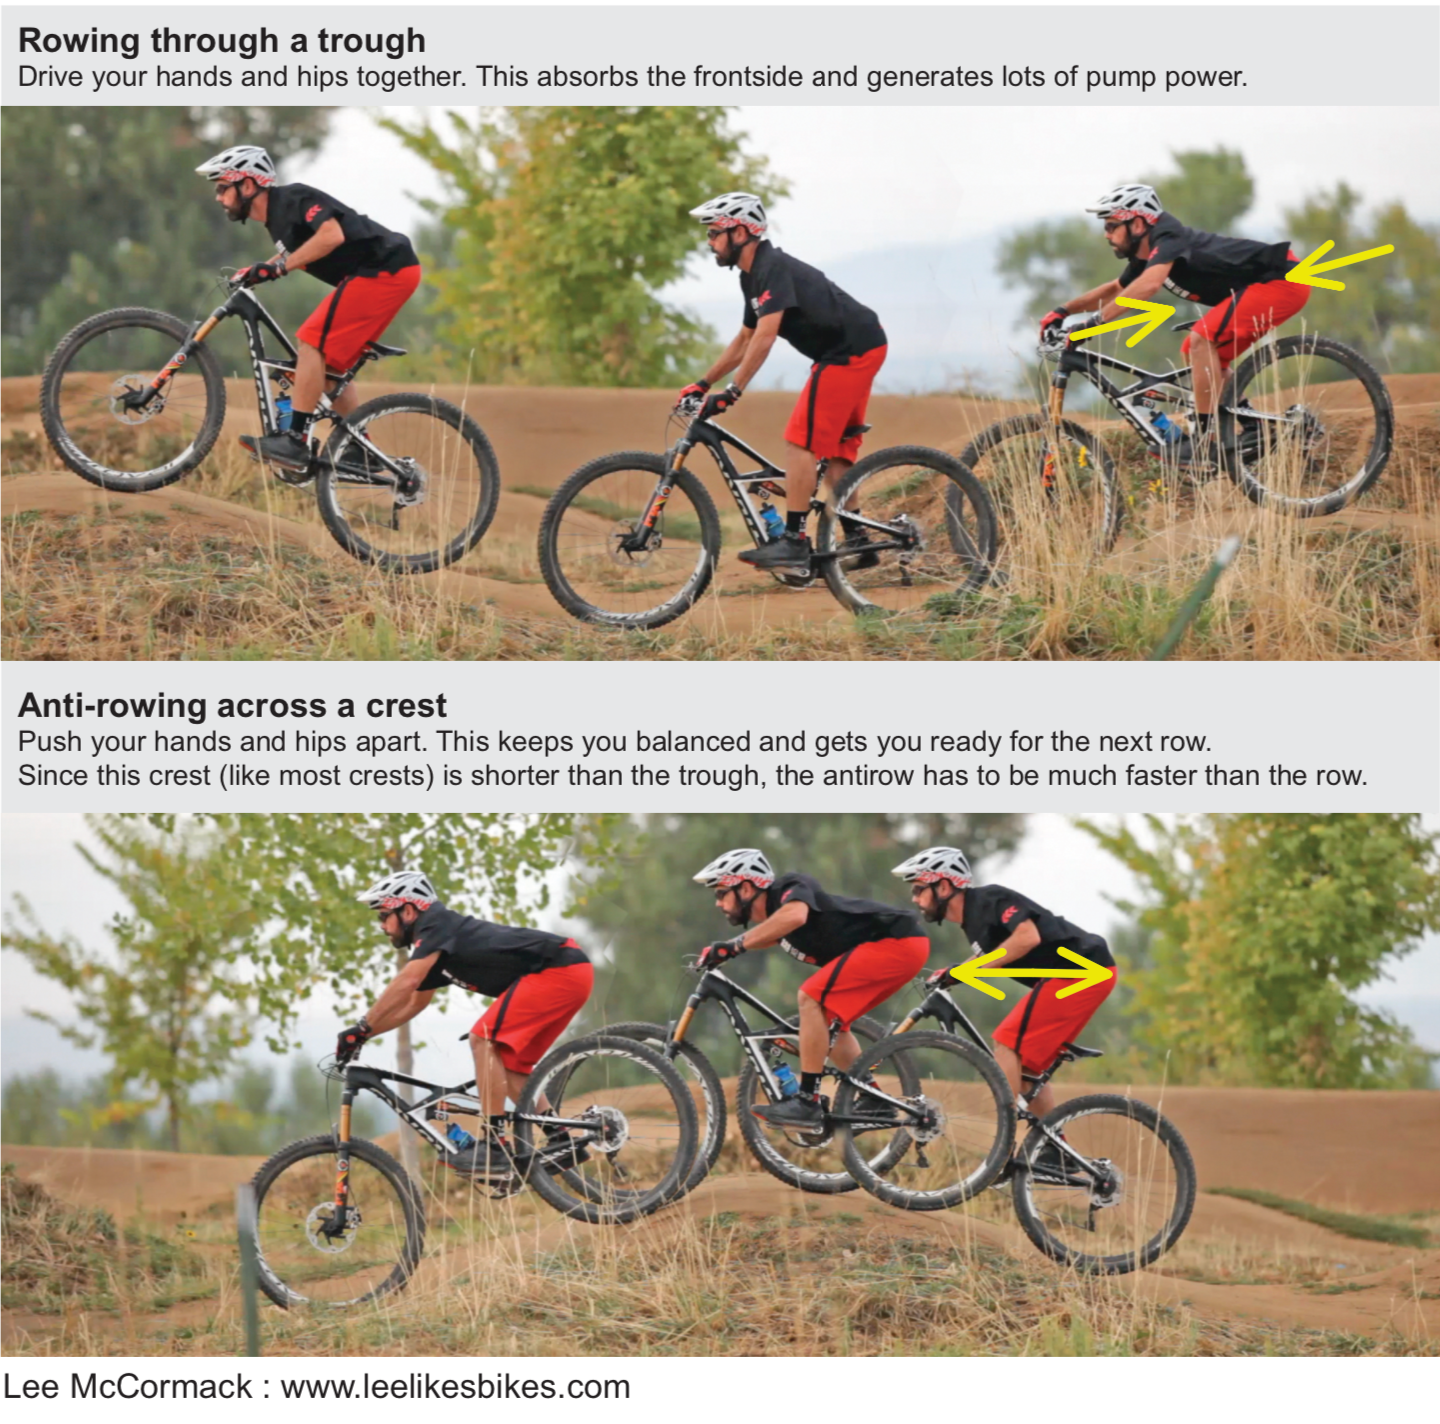 How to pump a mtb with row and anti-row